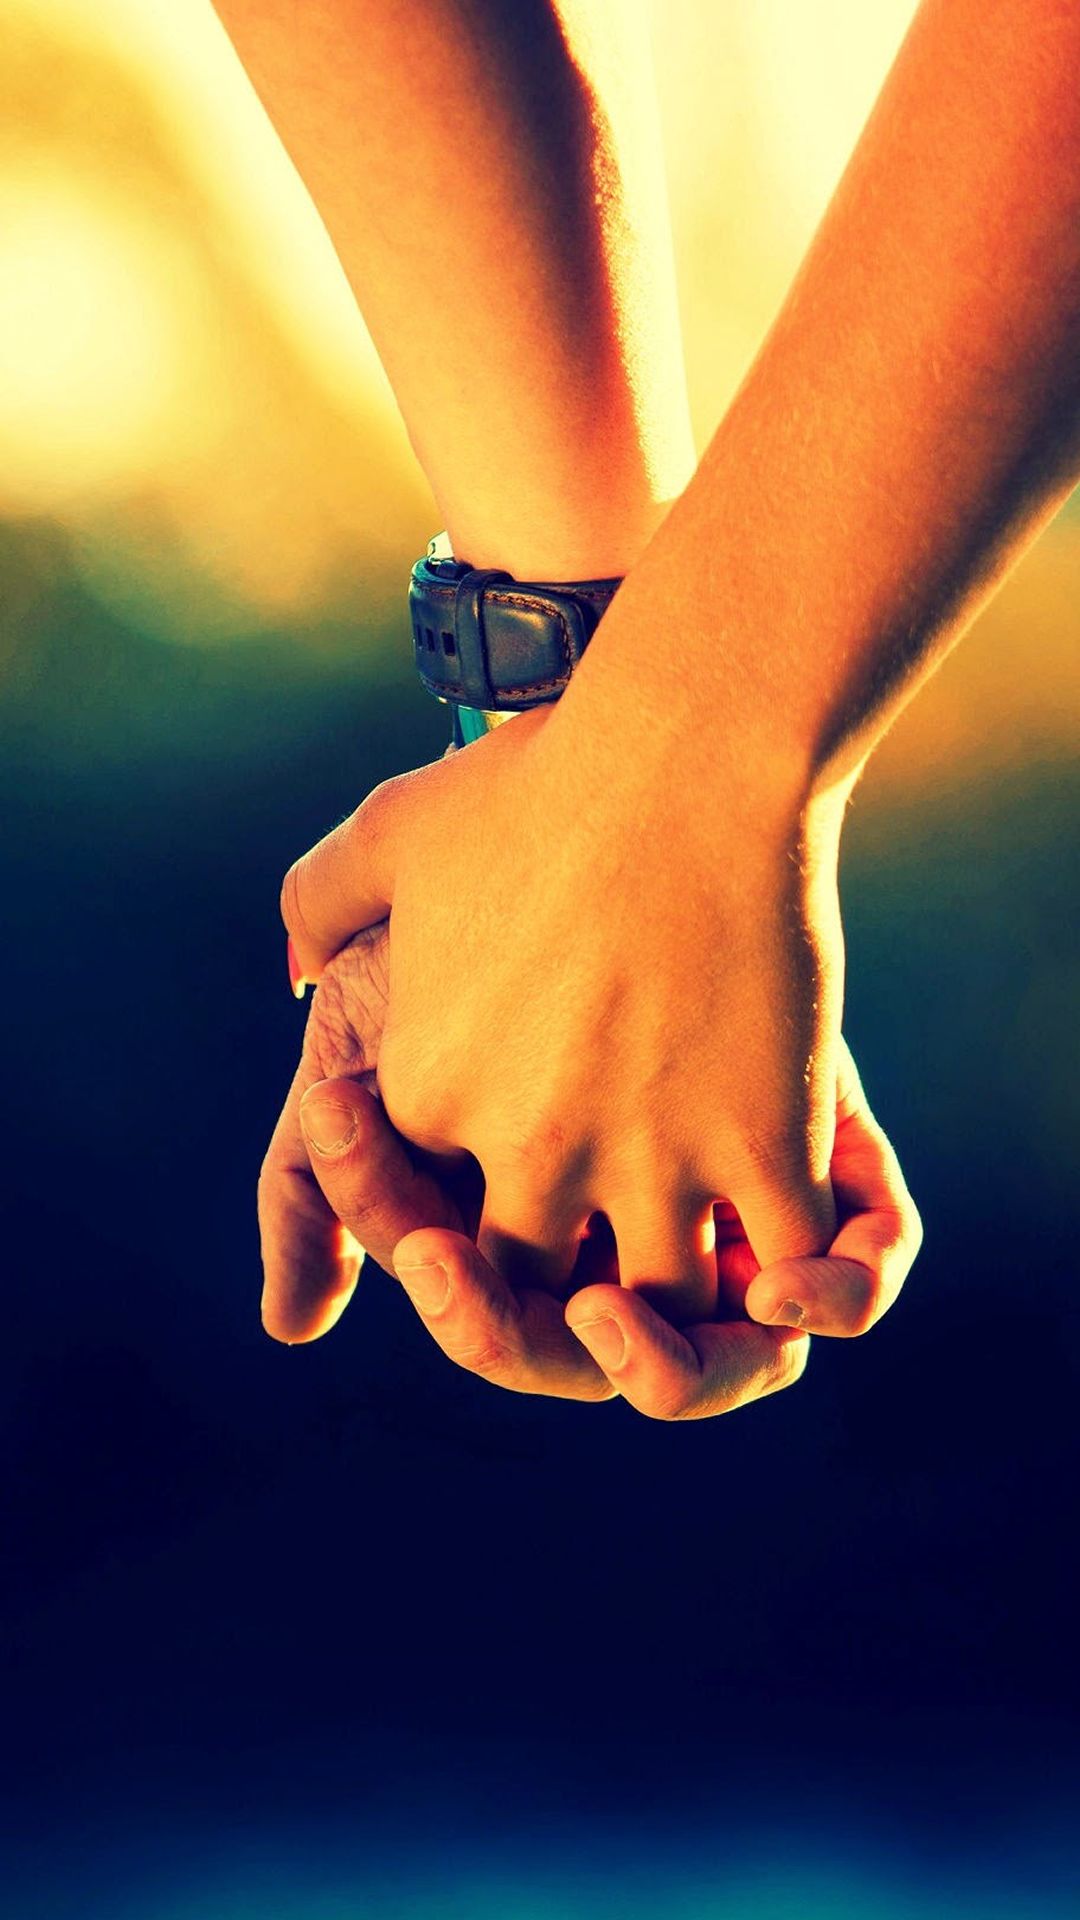 Holding hands photo